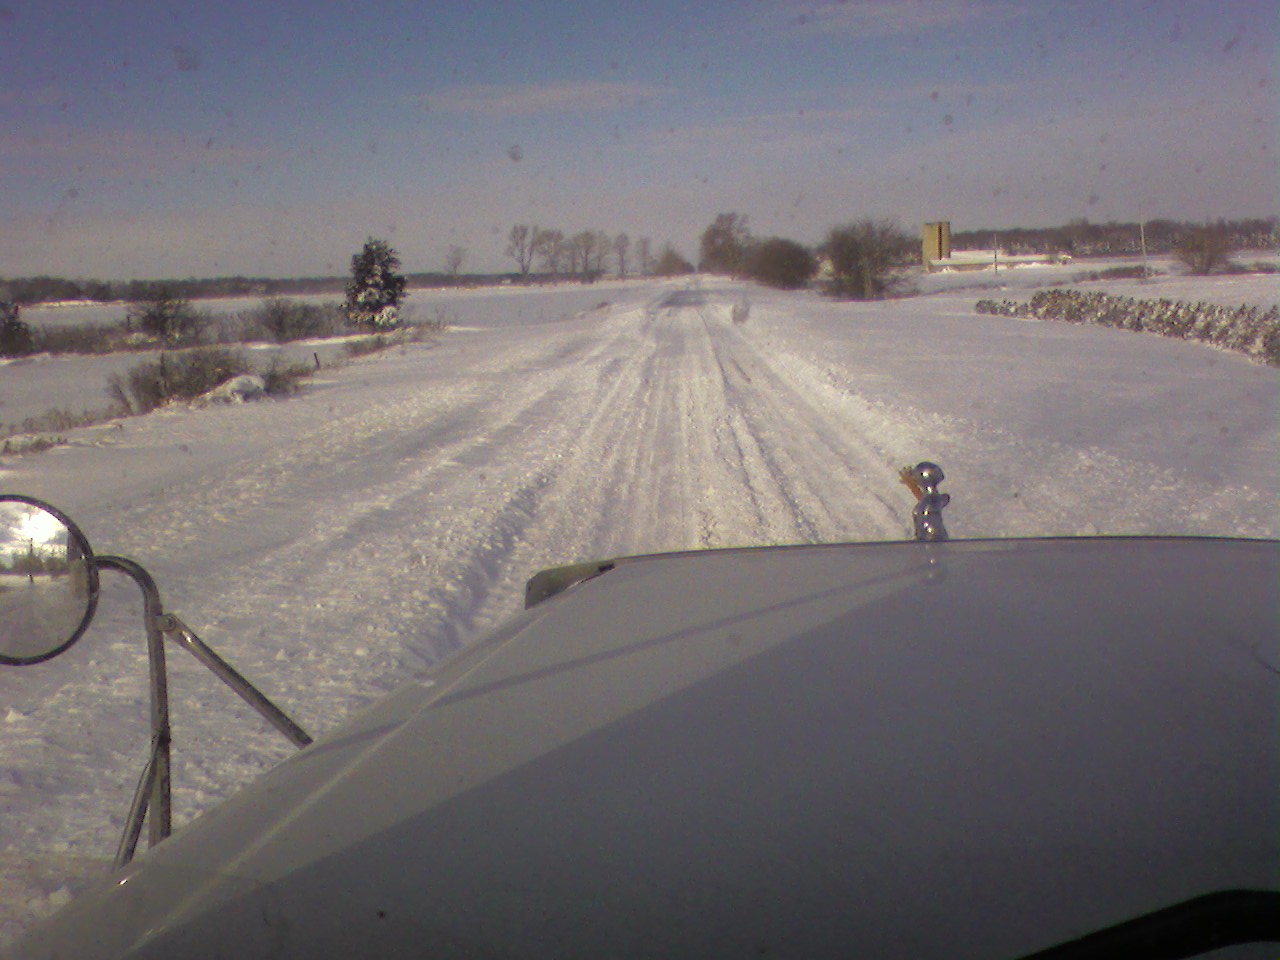 View from transport truck of a road covered in snow.